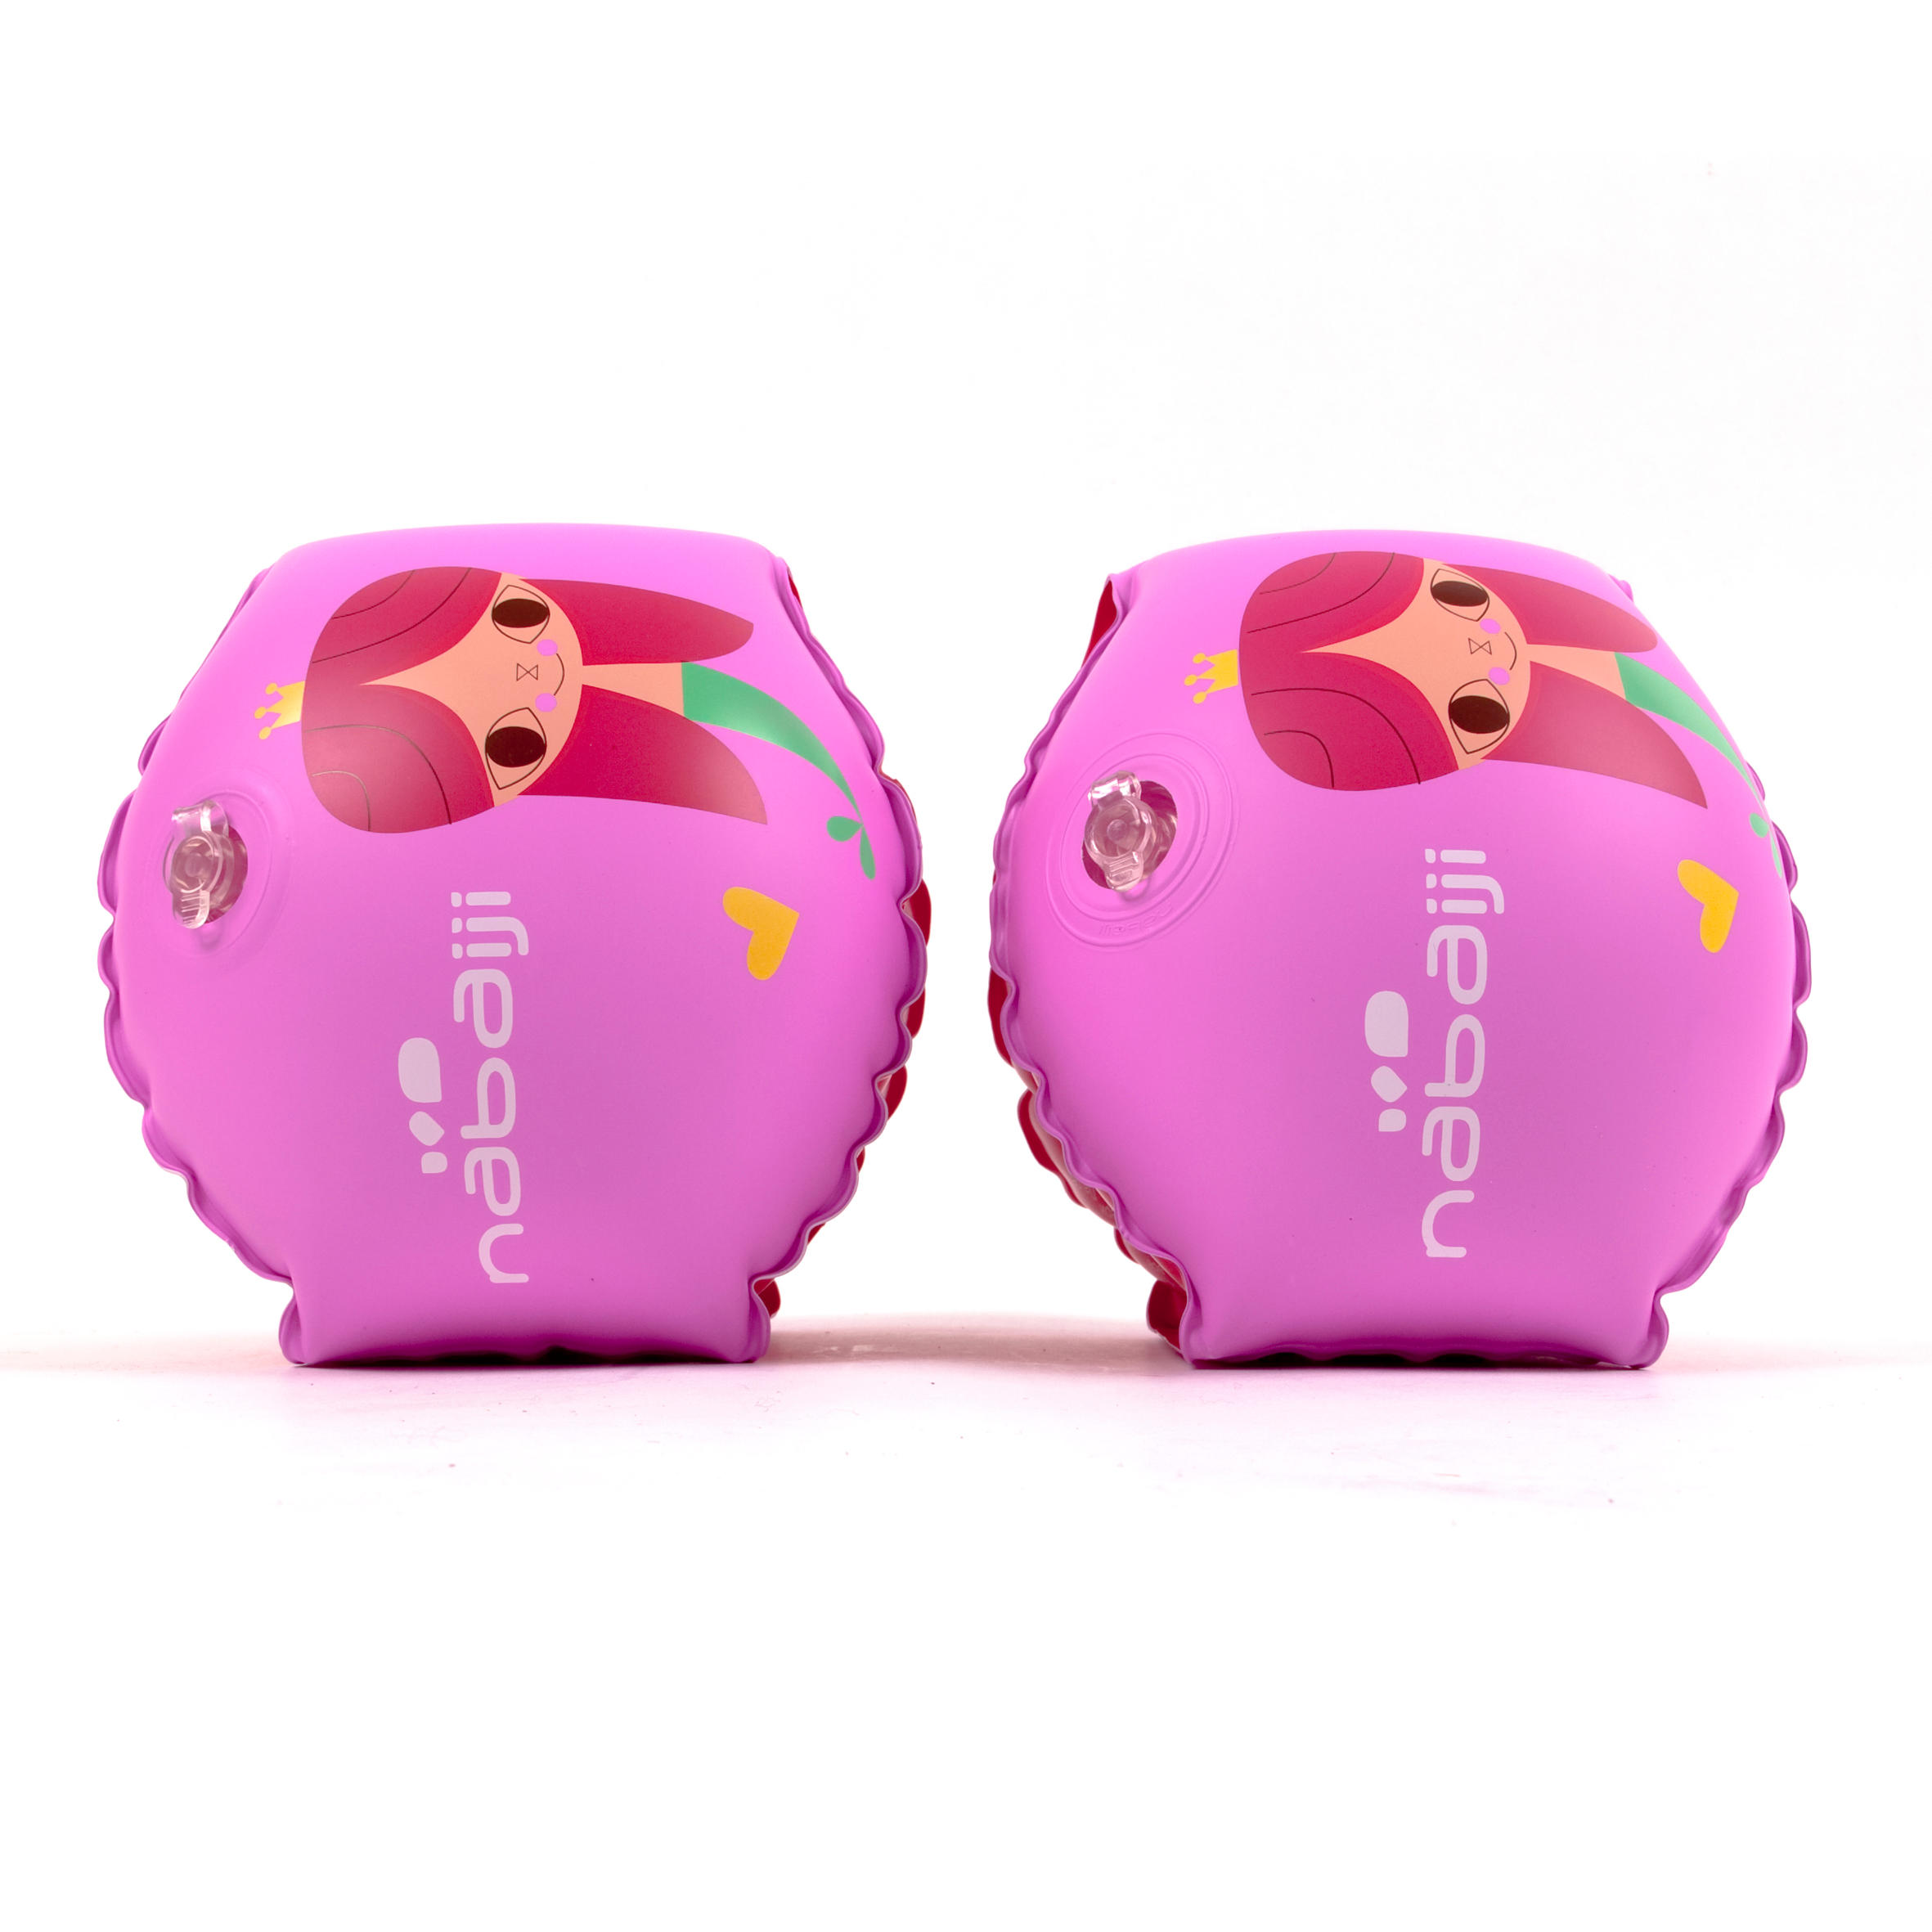 NABAIJI Armbands with "mermaid" print and two inflation chambers - Pink 11-30 kg